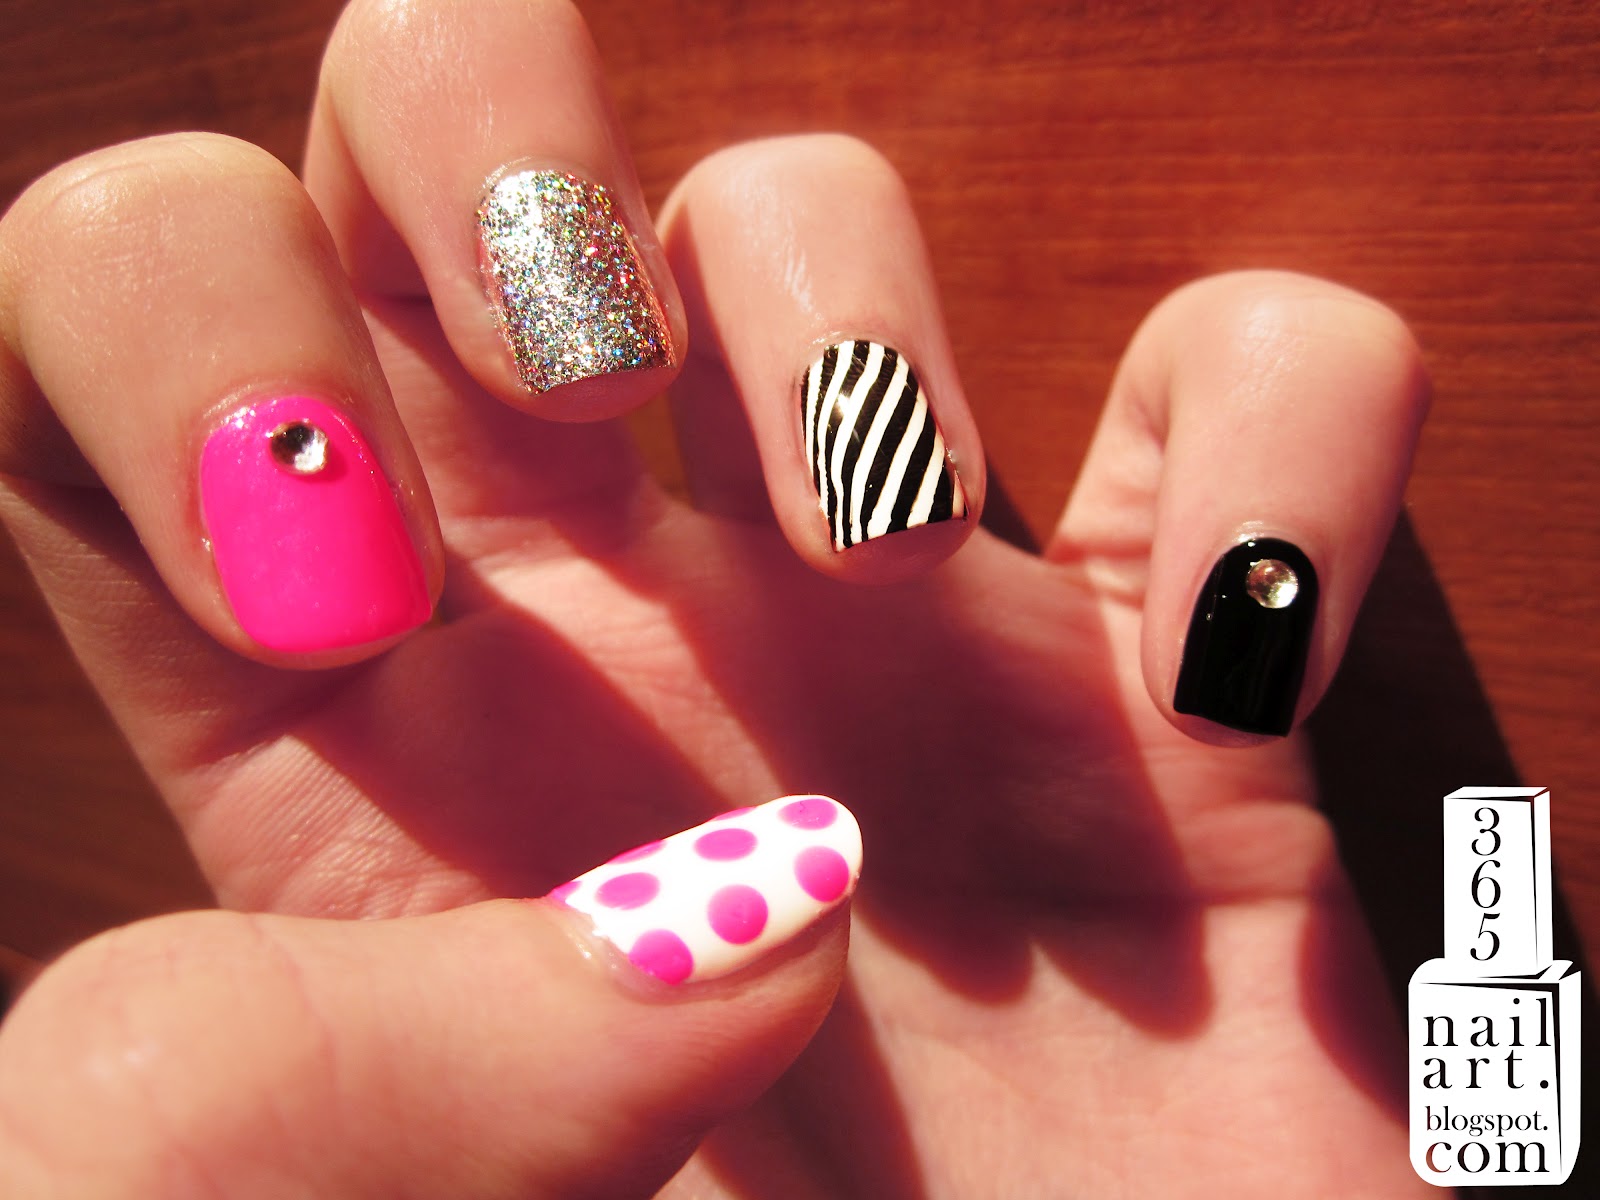 2. Mix and Match Nail Designs - wide 3